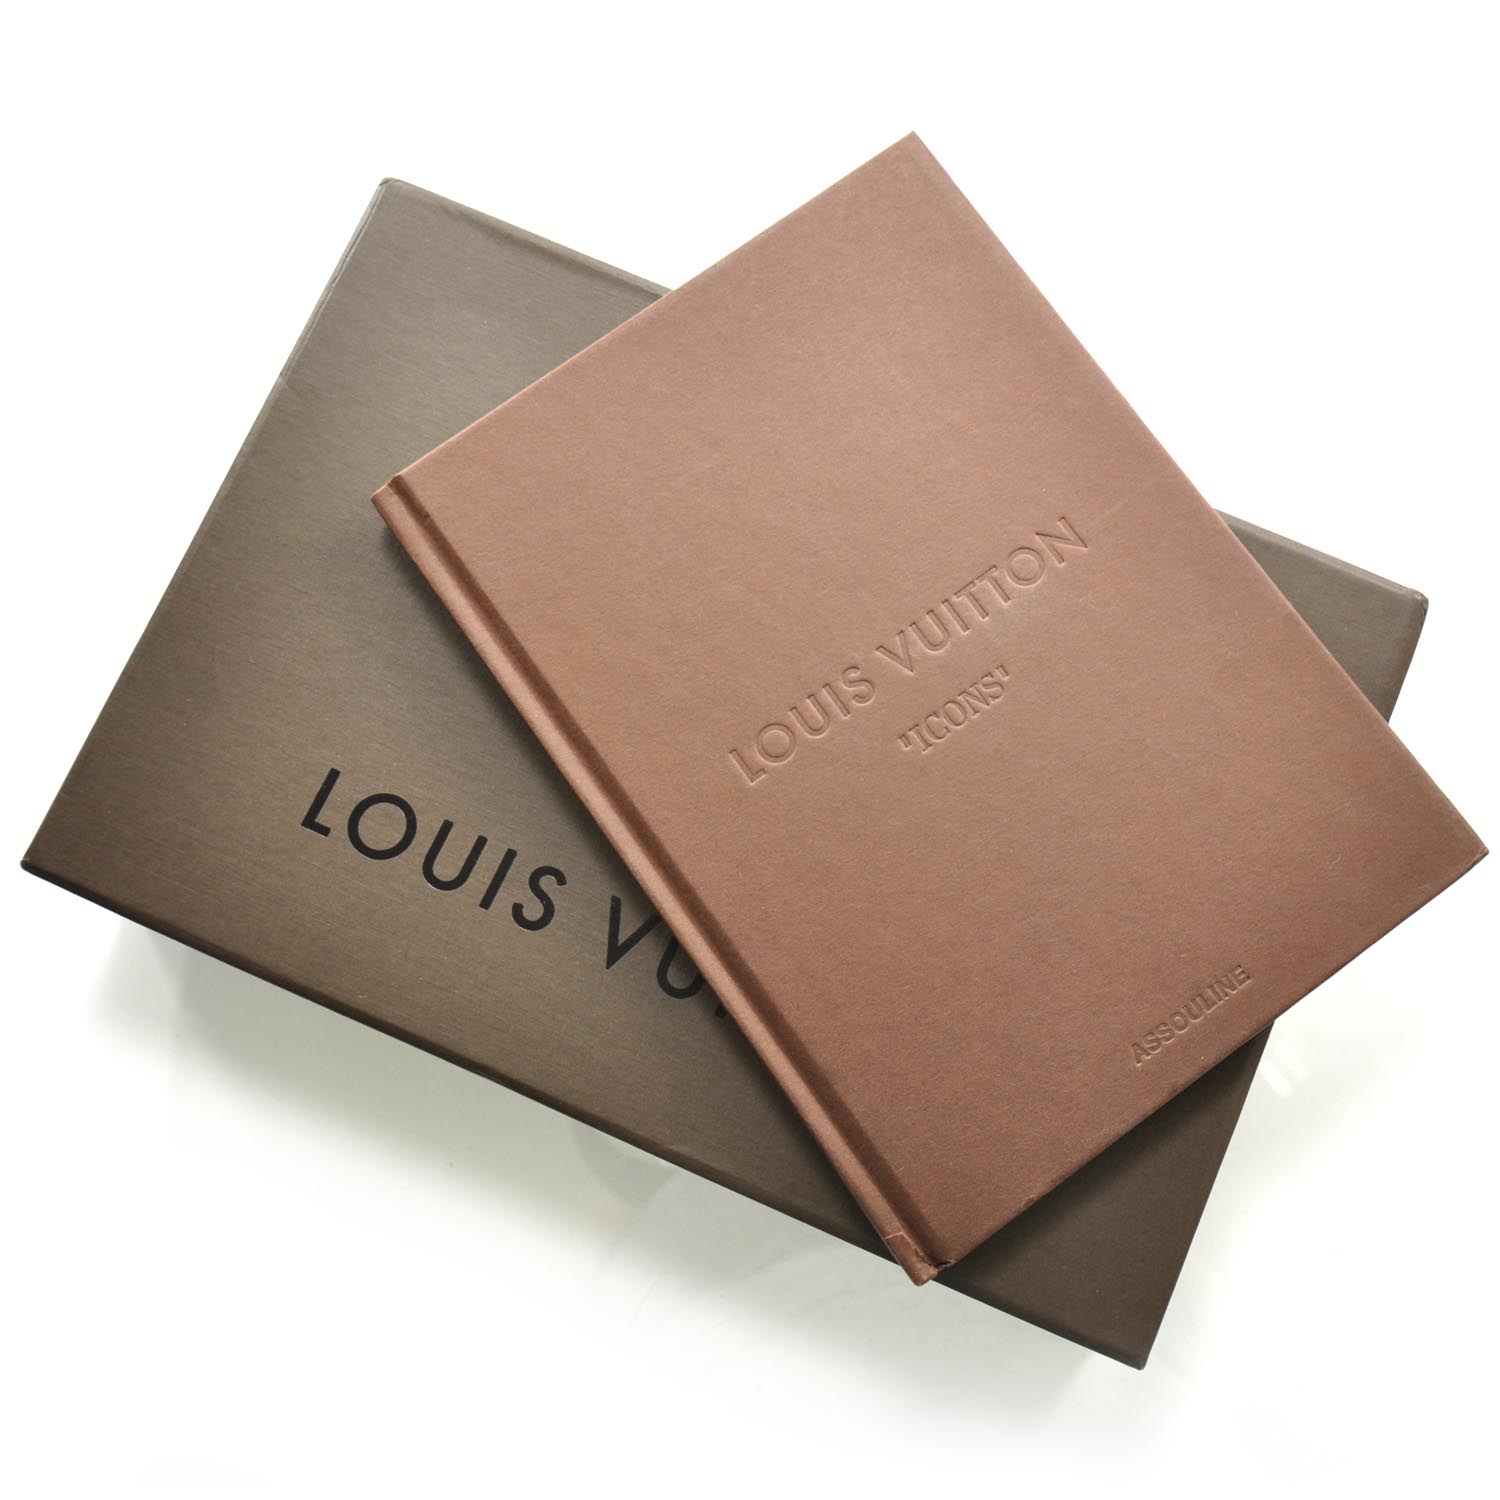 LOUIS VUITTON Icons Assouline Hardcover Book 22849